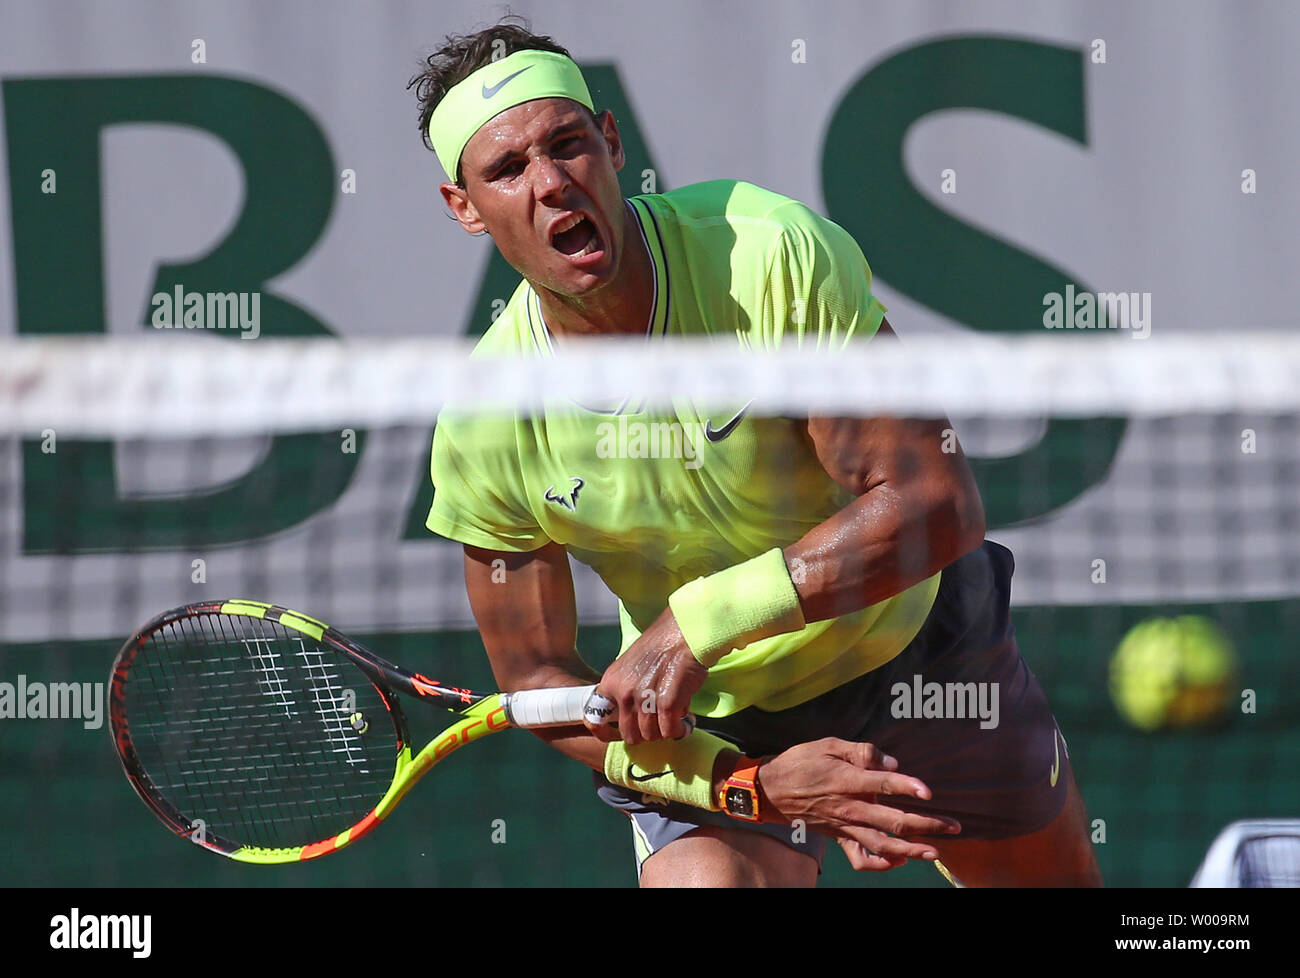 Rafael Nadal of Spain hits a serve during his French Open men's third round  match against David Goffin of Belgium at Roland Garros in Paris on May 31,  2019. Nadal defeated Goffin